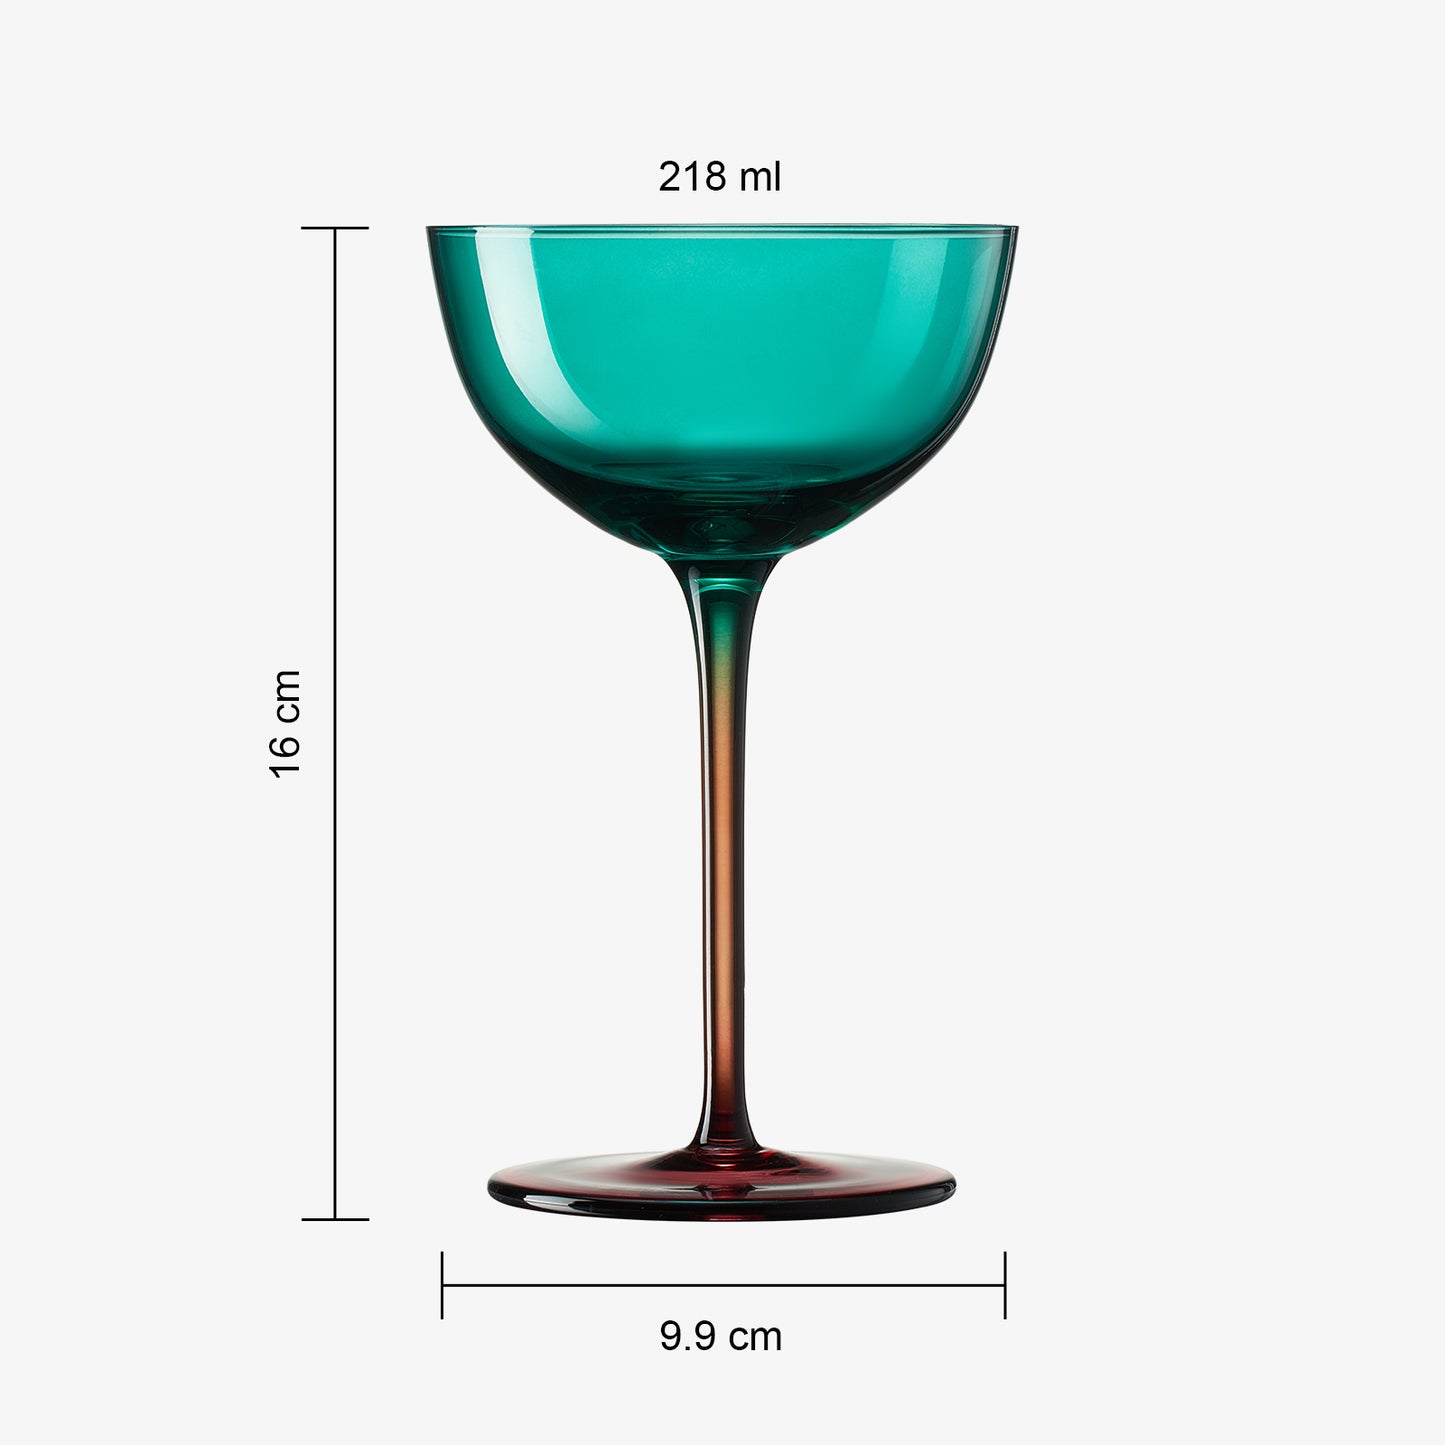 Venice Two-Toned Coupe Cocktail Glassware, Set of 2